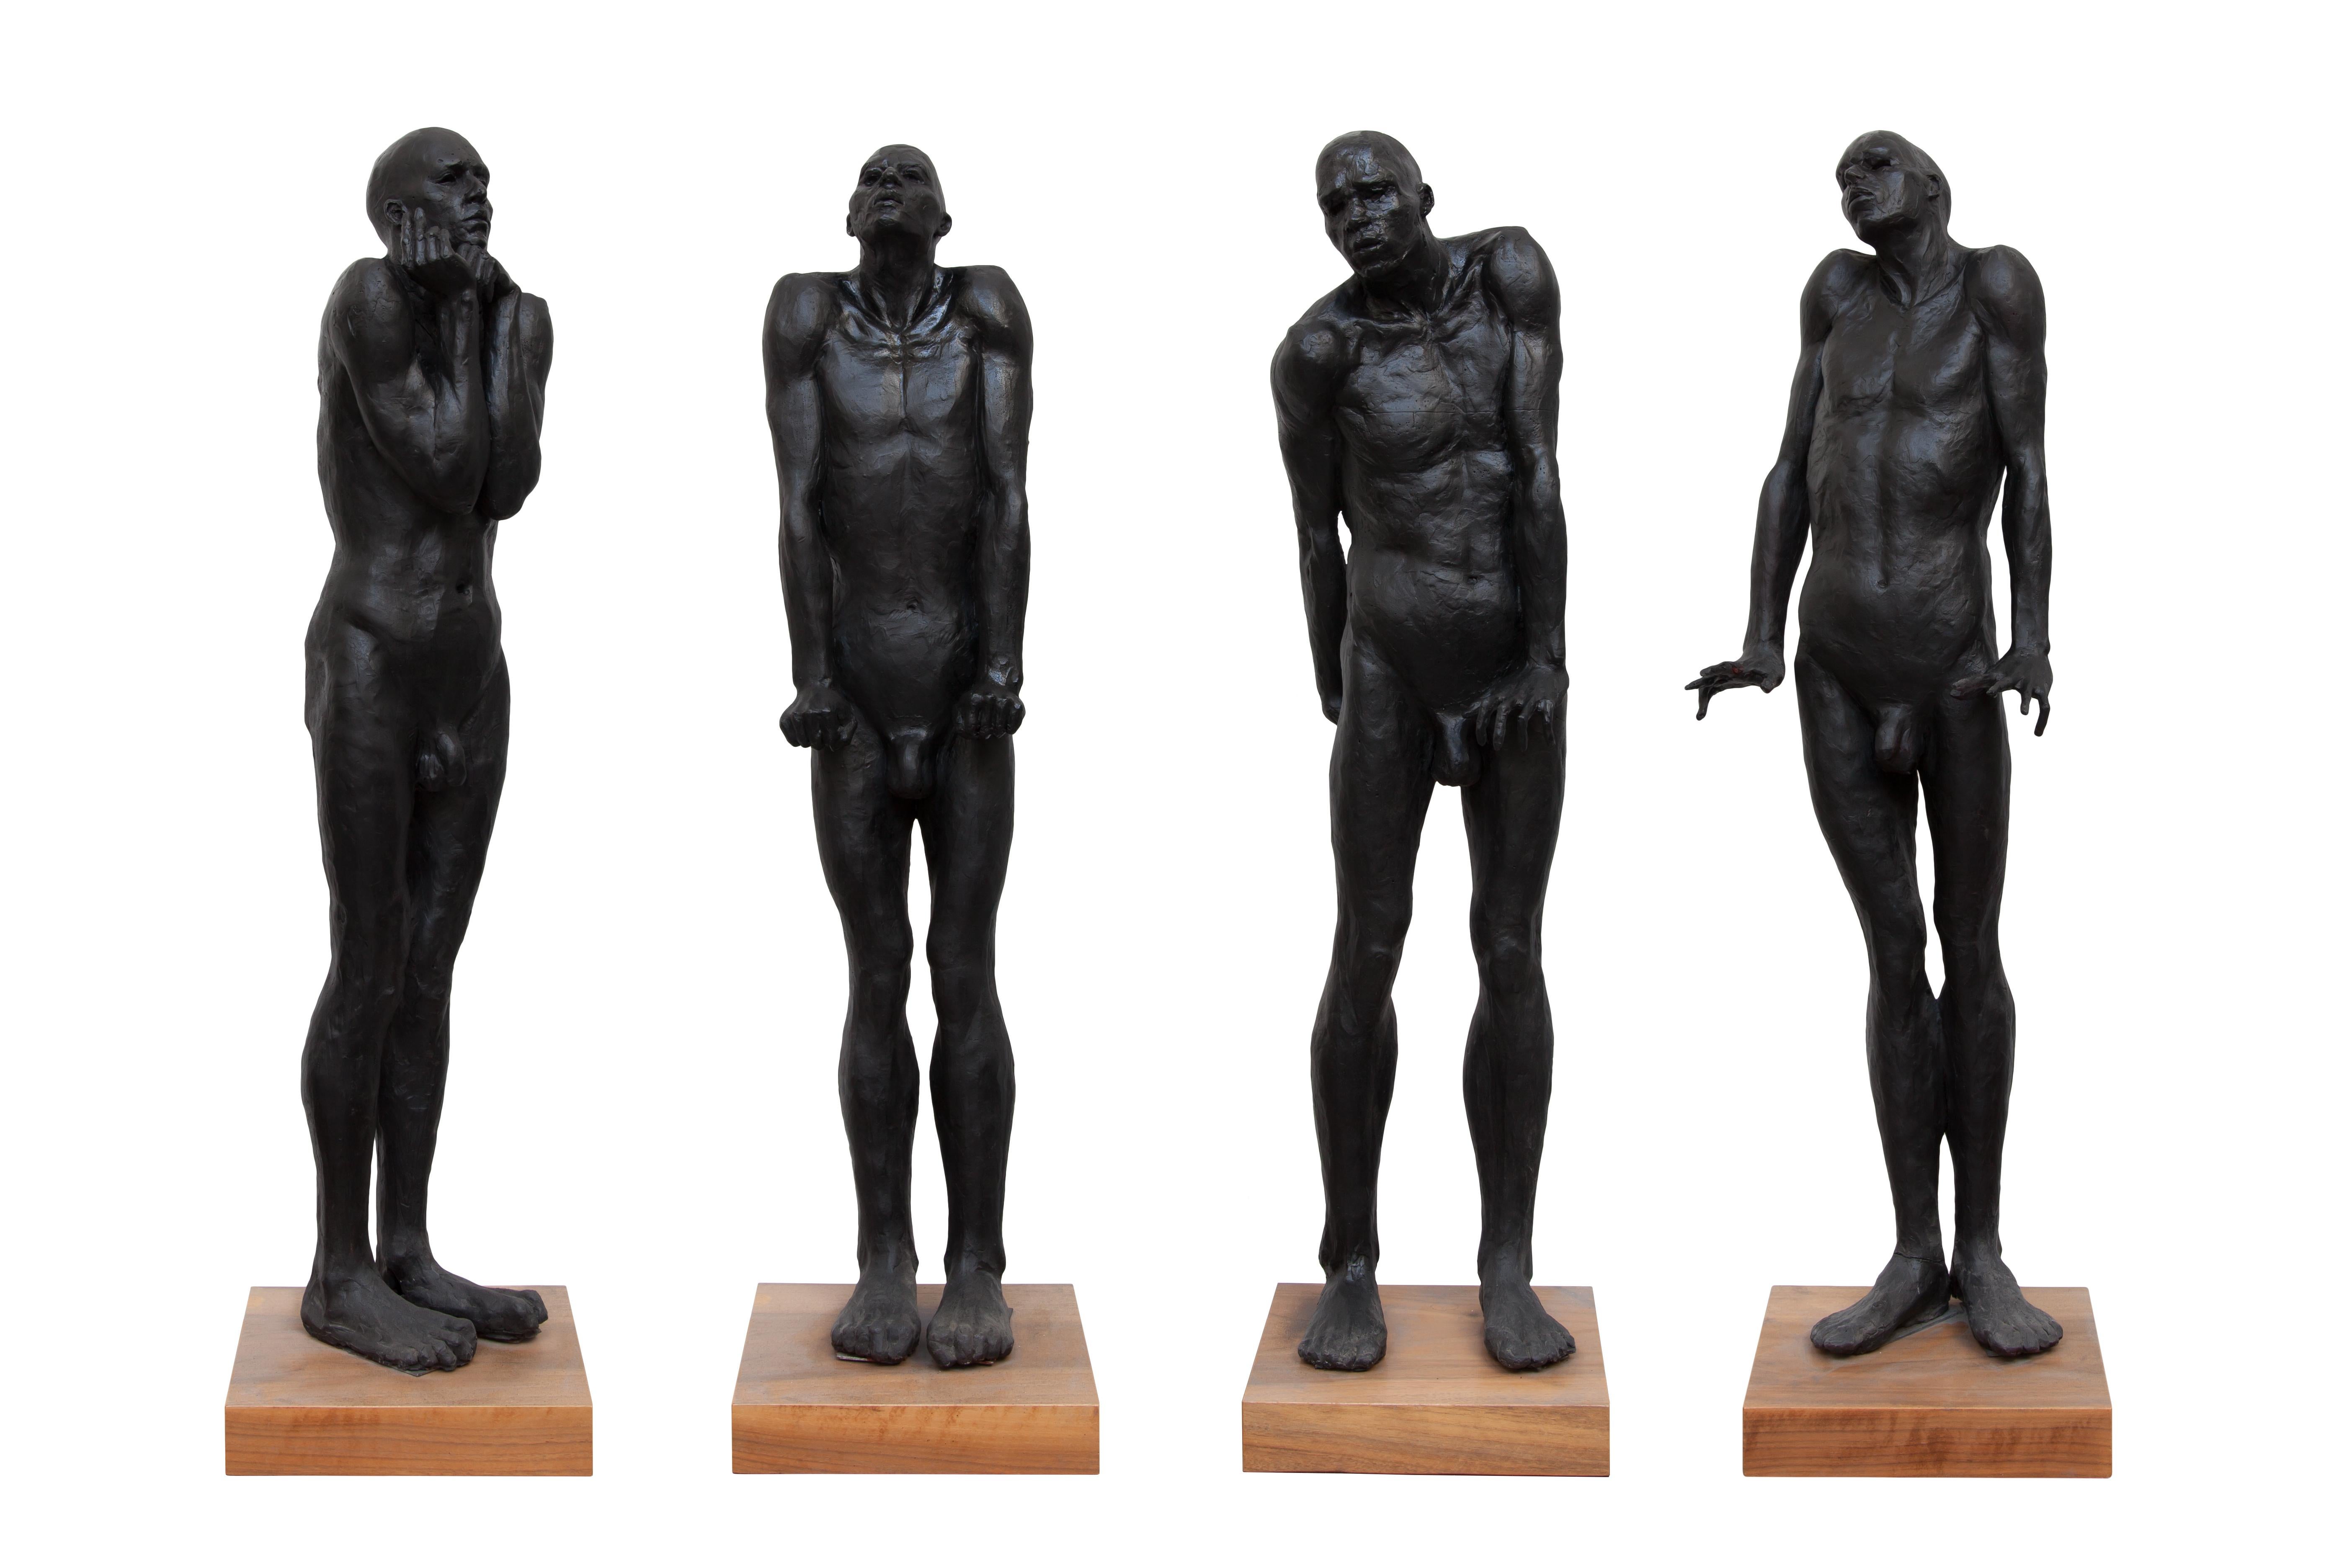 Seven Million and Counting (Sculpture 1) - Contemporary bronze sculpture  - Brown Figurative Sculpture by Guy Haddon Grant